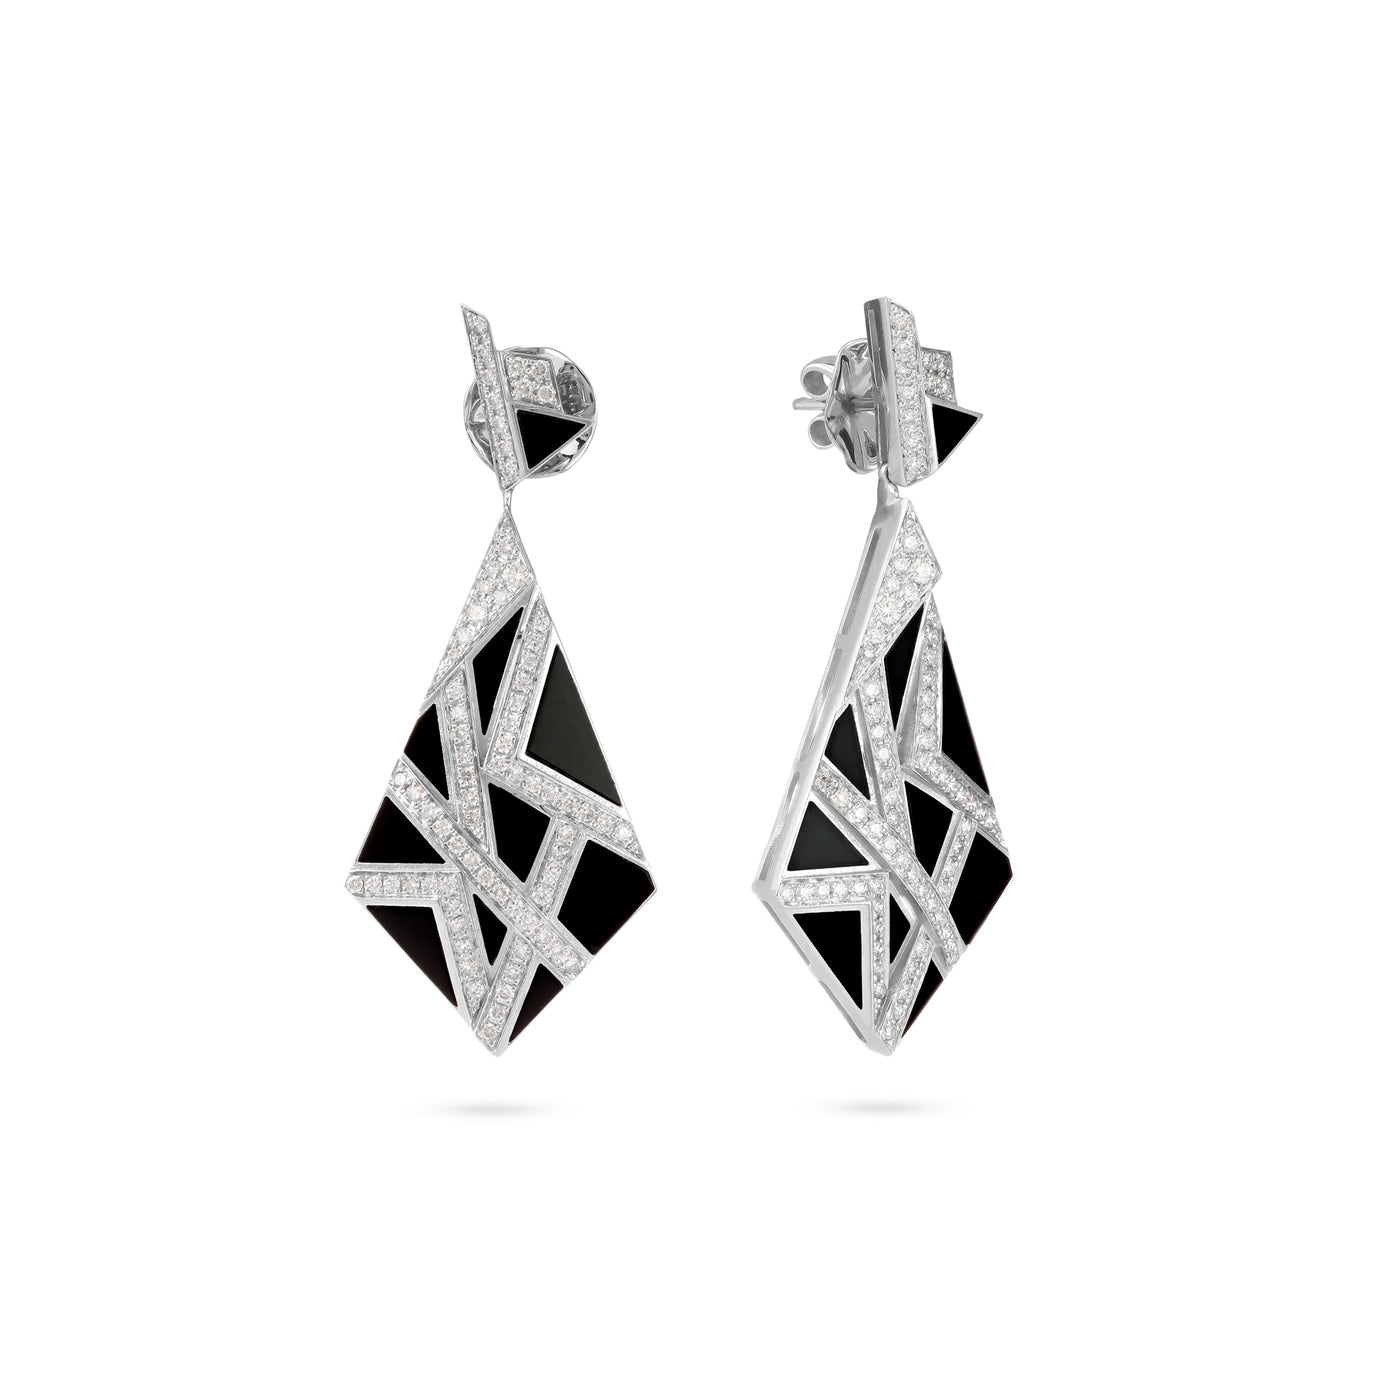 White Gold Diamond Earrings Pyramid With Black Onyx, by Soit Belle